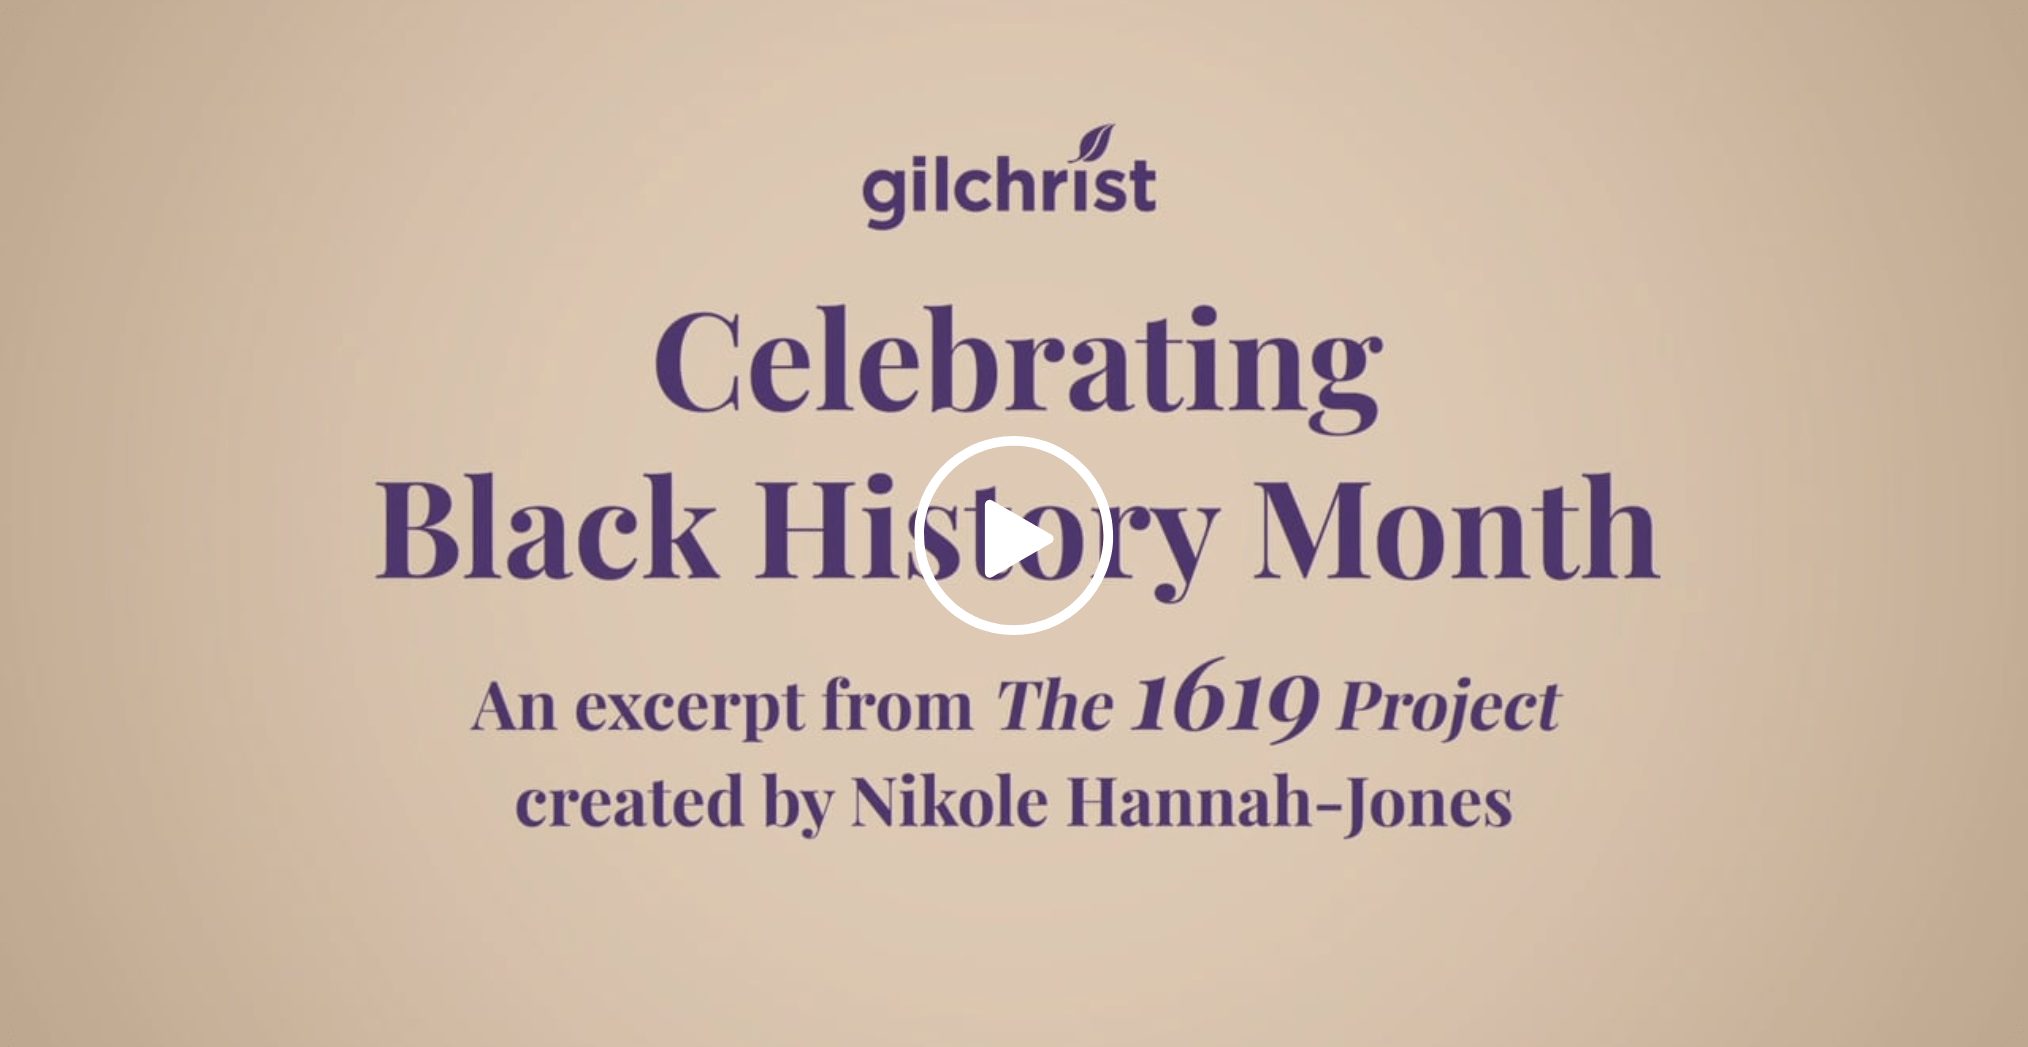 Gilchrist - Black History Month